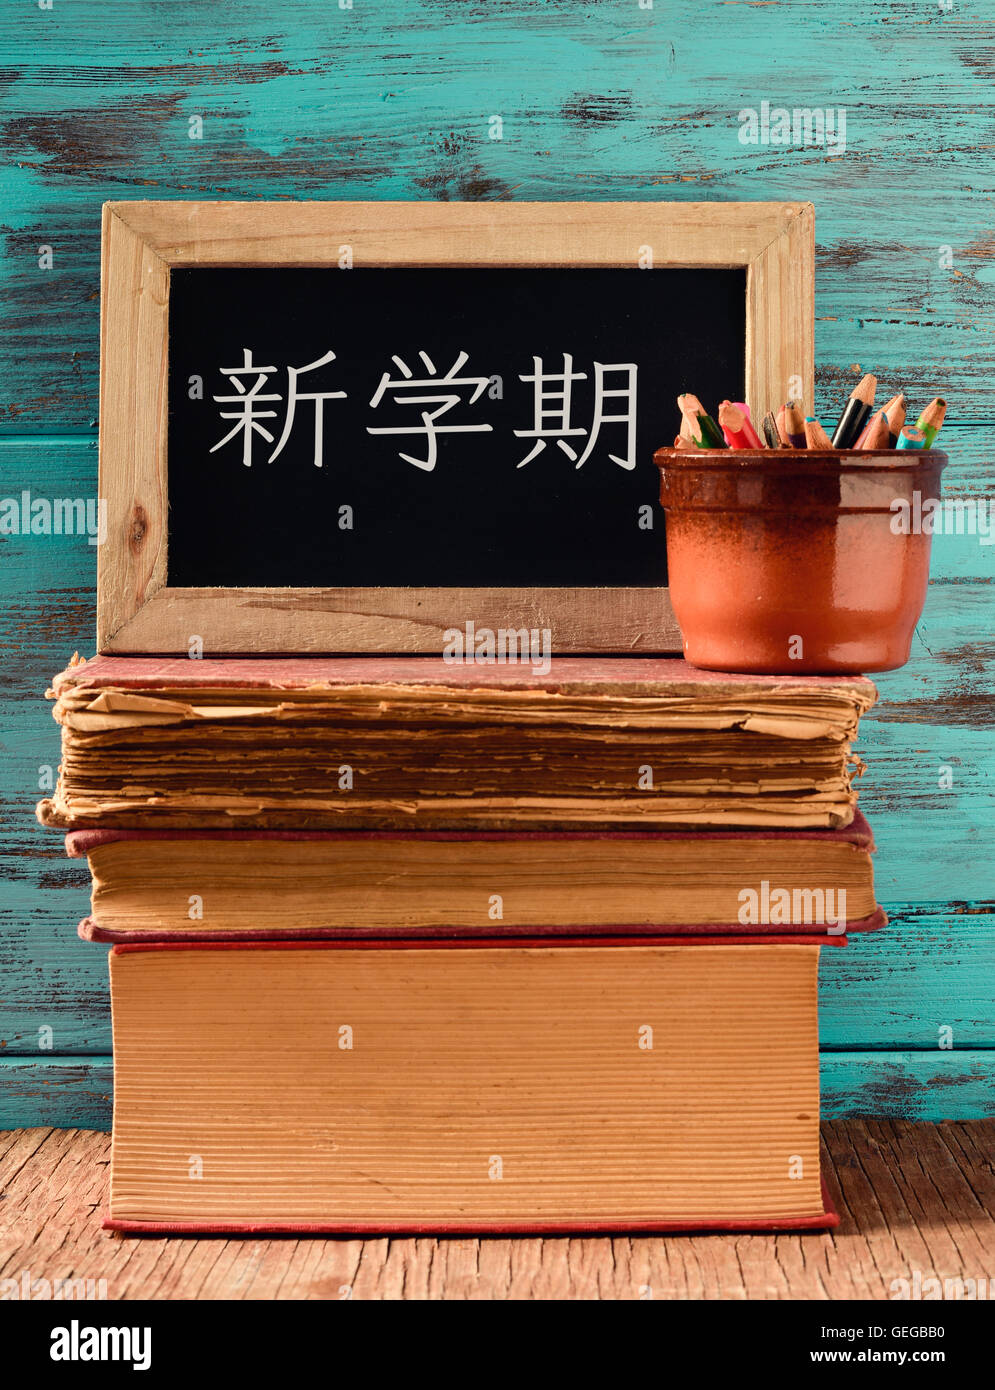 a chalkboard with the text back to school written in Japanese and a pot with some pencils on a pile of old books, placed on a ru Stock Photo